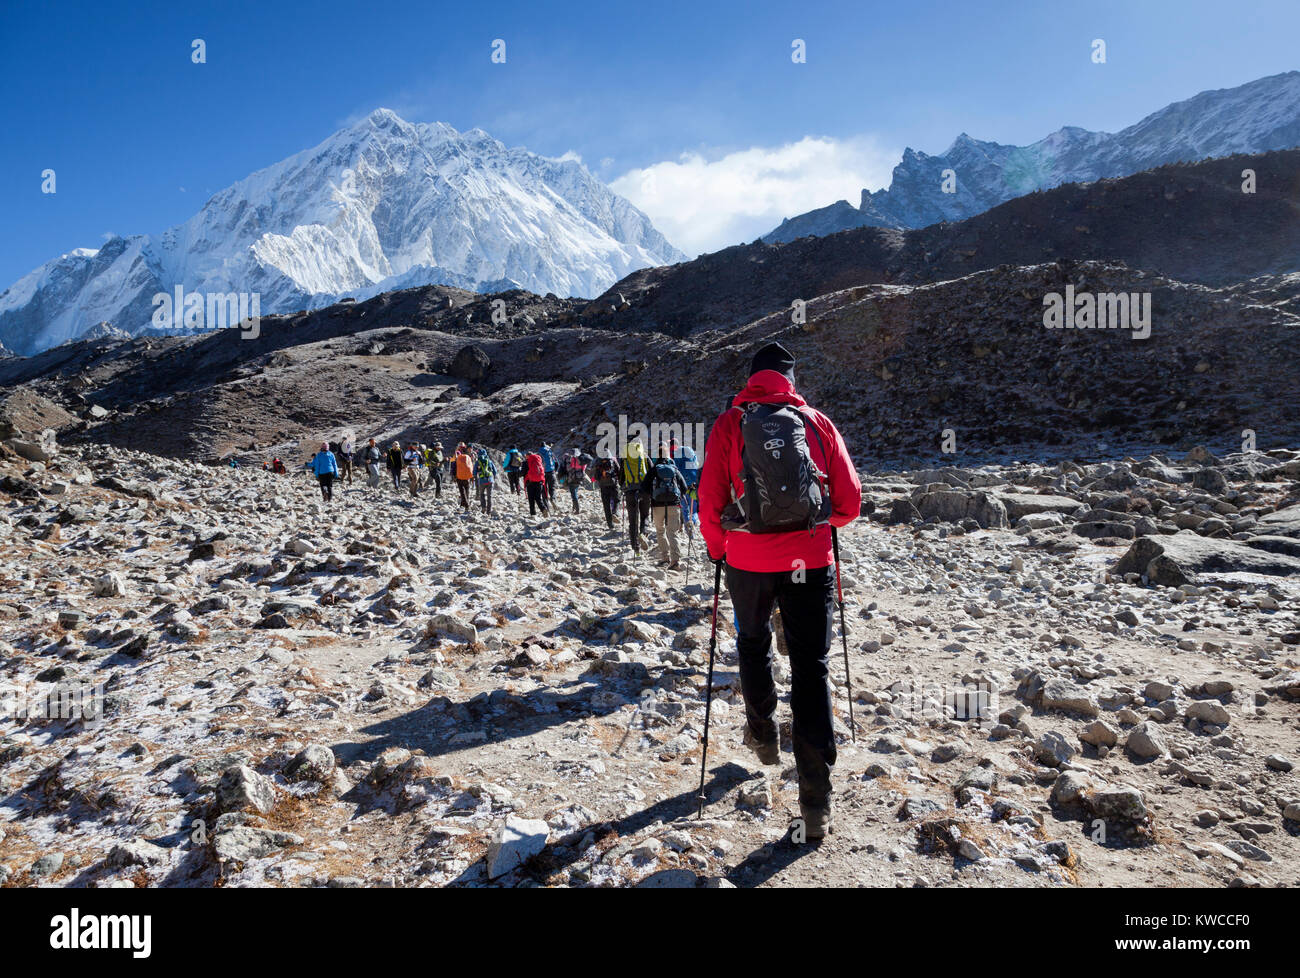 Mounts Everest and Lothse, way to Everest base camp Stock Photo